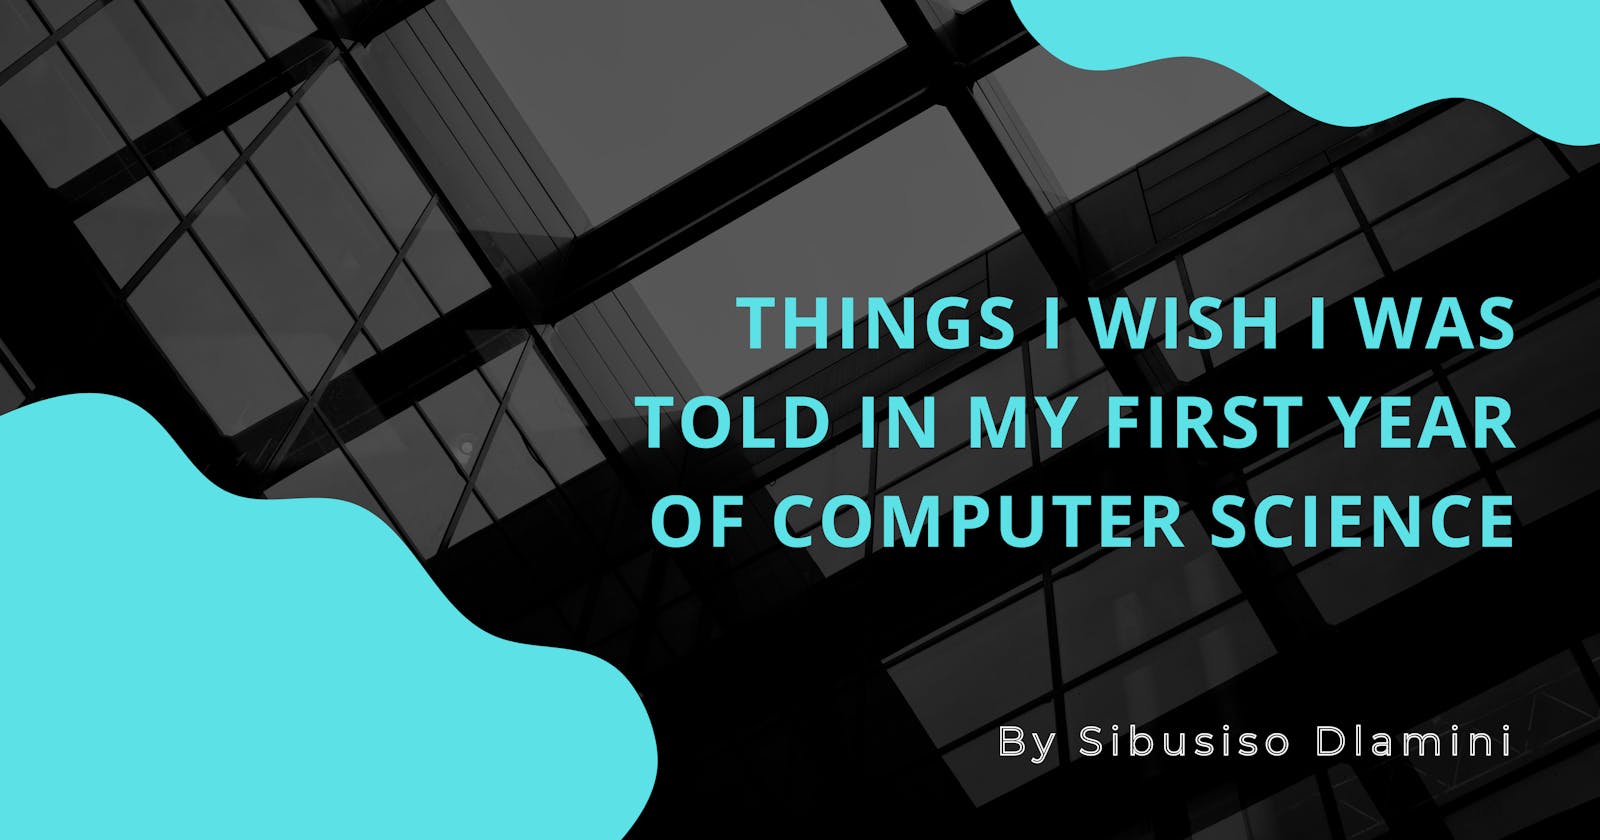 Things I wish I was told in my first year of Computer Science